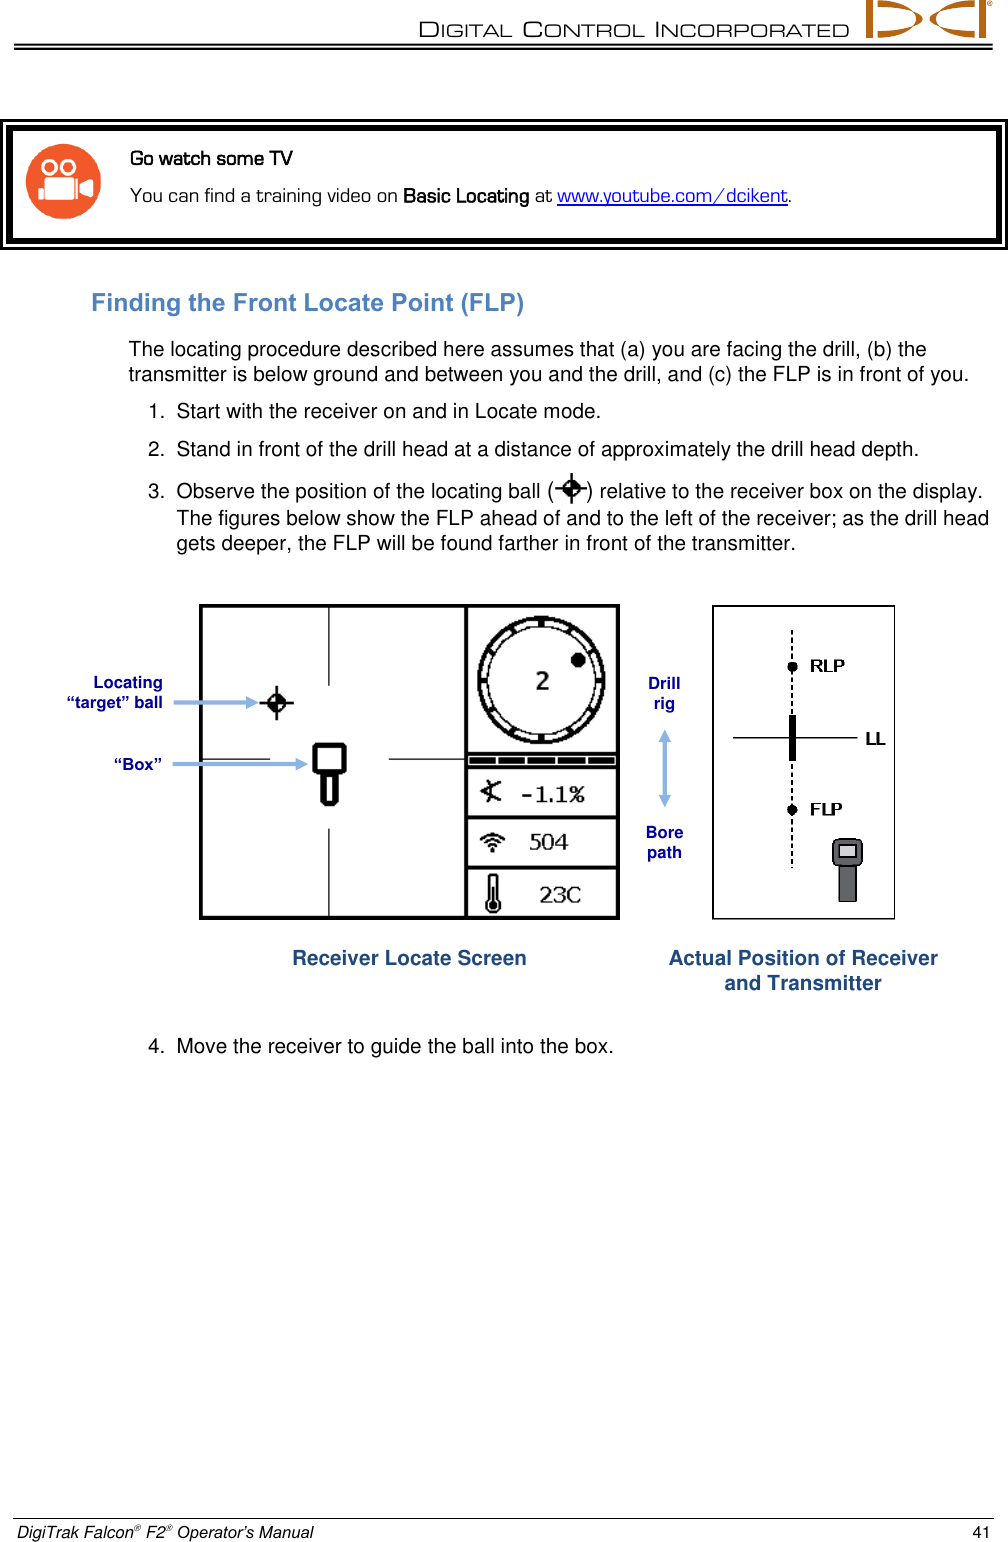 DIGITAL  CONTROL  INCORPORATED  DigiTrak Falcon F2 Operator’s Manual 41   Go watch some TV You can find a training video on Basic Locating at www.youtube.com/dcikent. Finding the Front Locate Point (FLP) The locating procedure described here assumes that (a) you are facing the drill, (b) the transmitter is below ground and between you and the drill, and (c) the FLP is in front of you. 1.  Start with the receiver on and in Locate mode. 2.  Stand in front of the drill head at a distance of approximately the drill head depth. 3.  Observe the position of the locating ball ( ) relative to the receiver box on the display. The figures below show the FLP ahead of and to the left of the receiver; as the drill head gets deeper, the FLP will be found farther in front of the transmitter.  Receiver Locate Screen  Actual Position of Receiver and Transmitter 4.  Move the receiver to guide the ball into the box. Locating “target” ball “Box” Drill rig Bore path 